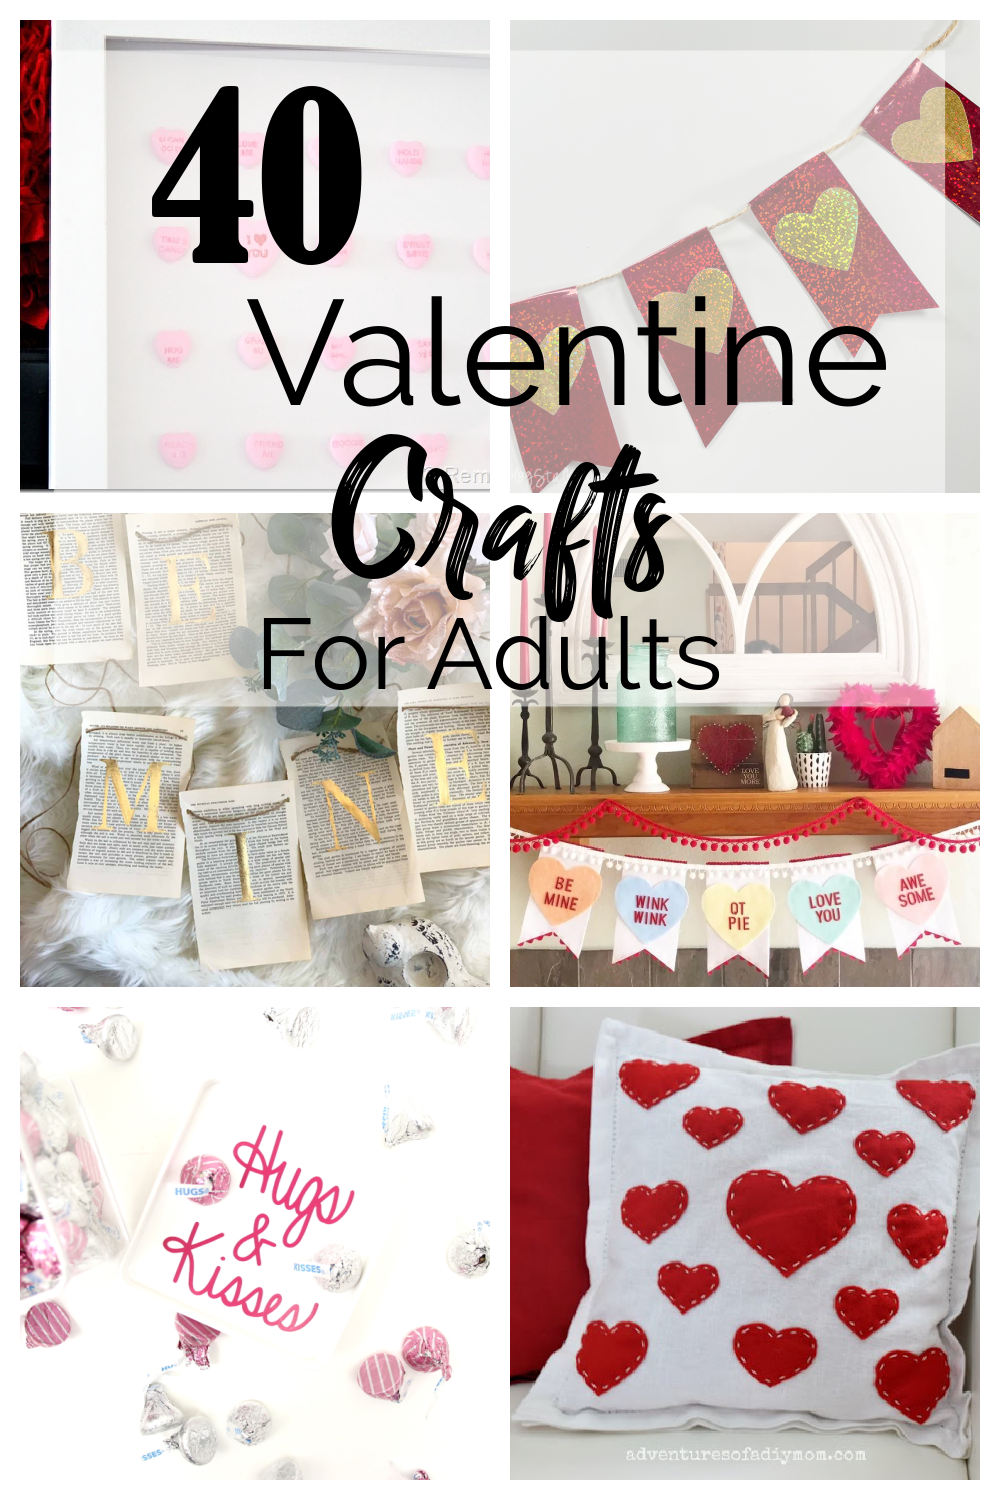 Valentine's Day Bedroom Decor - Domestically Blissful